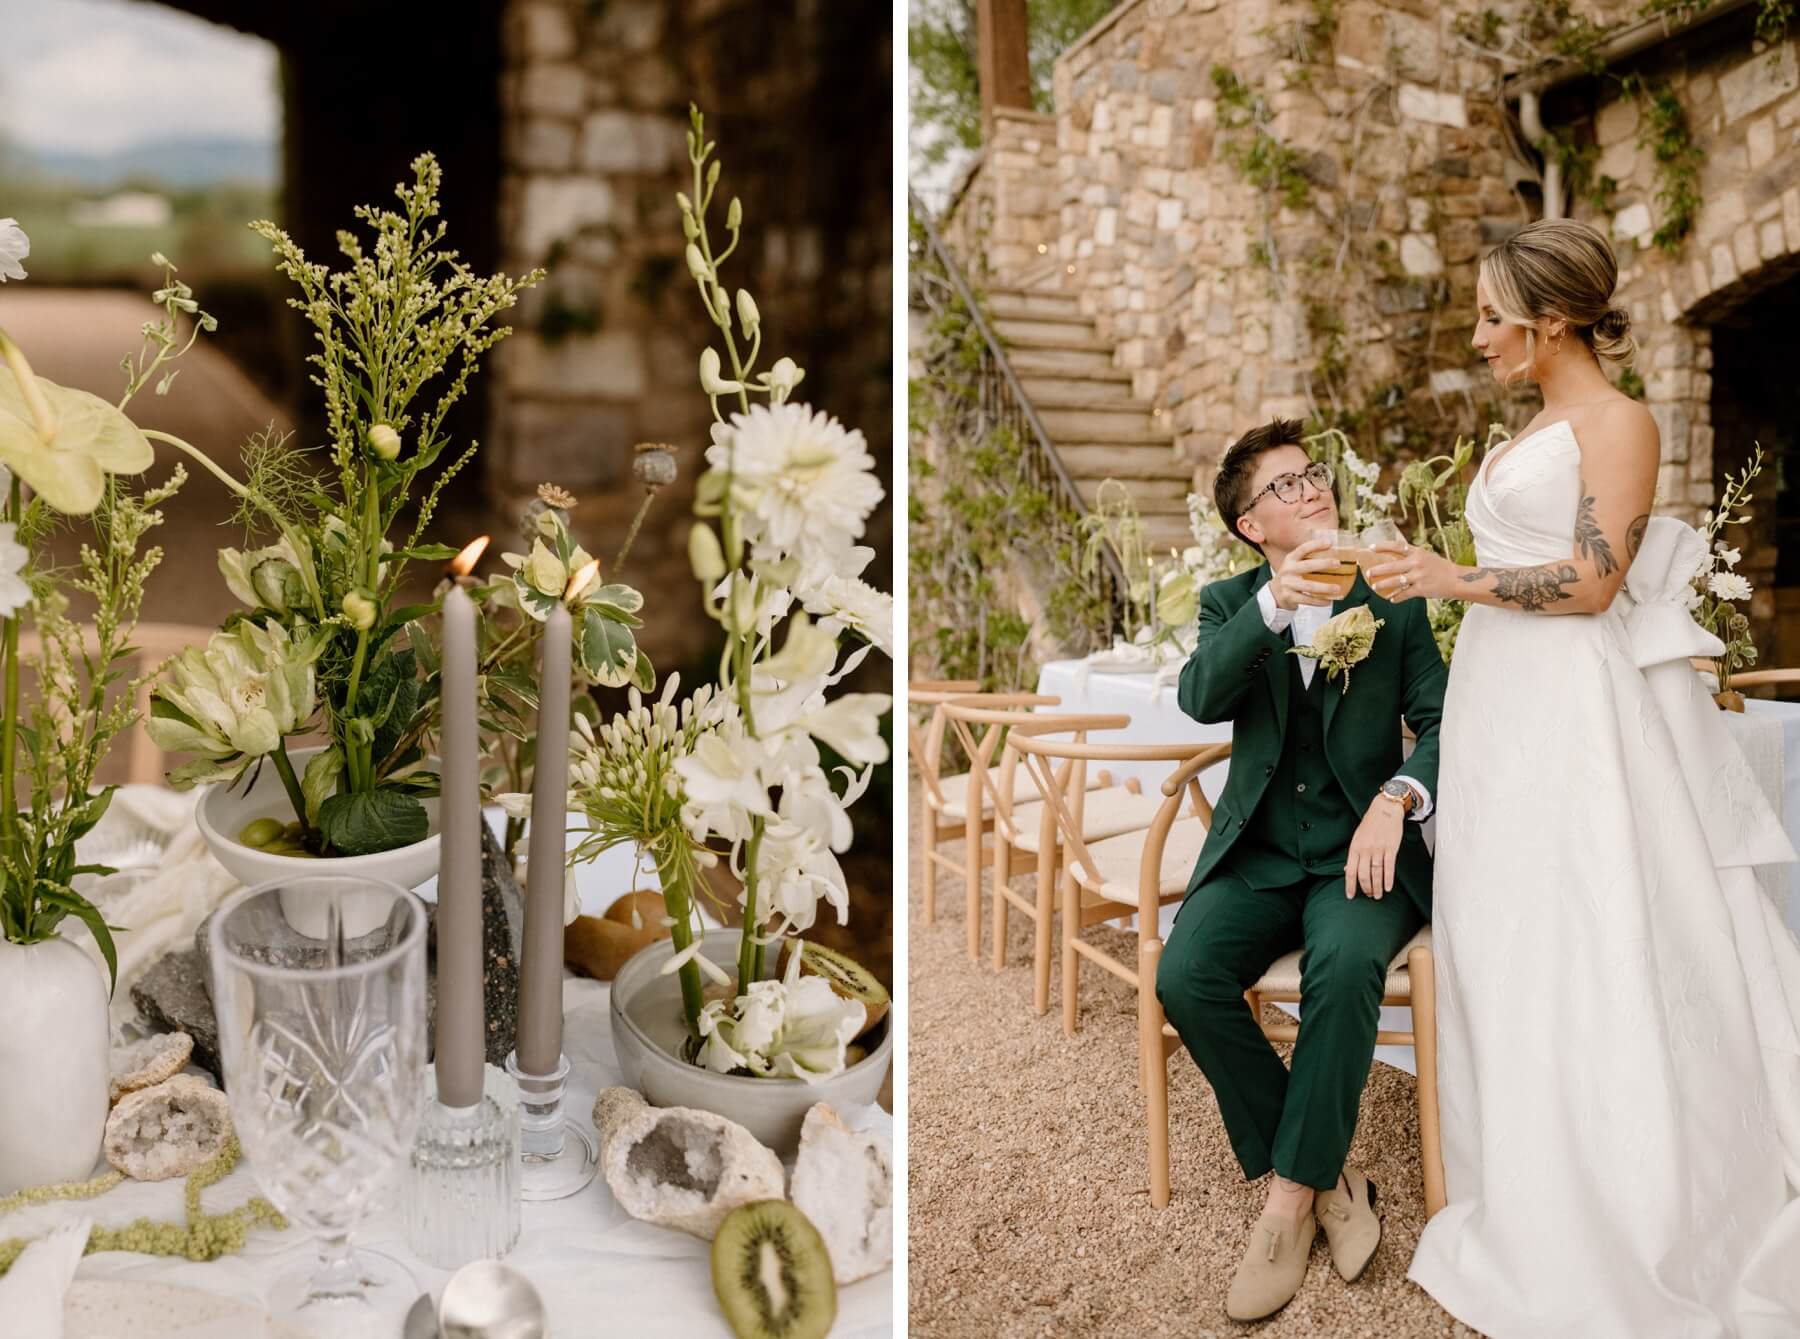 Stone colored tapered candles with green and white wedding flowers | Partner sitting in chair and clinking glasses with standing partner